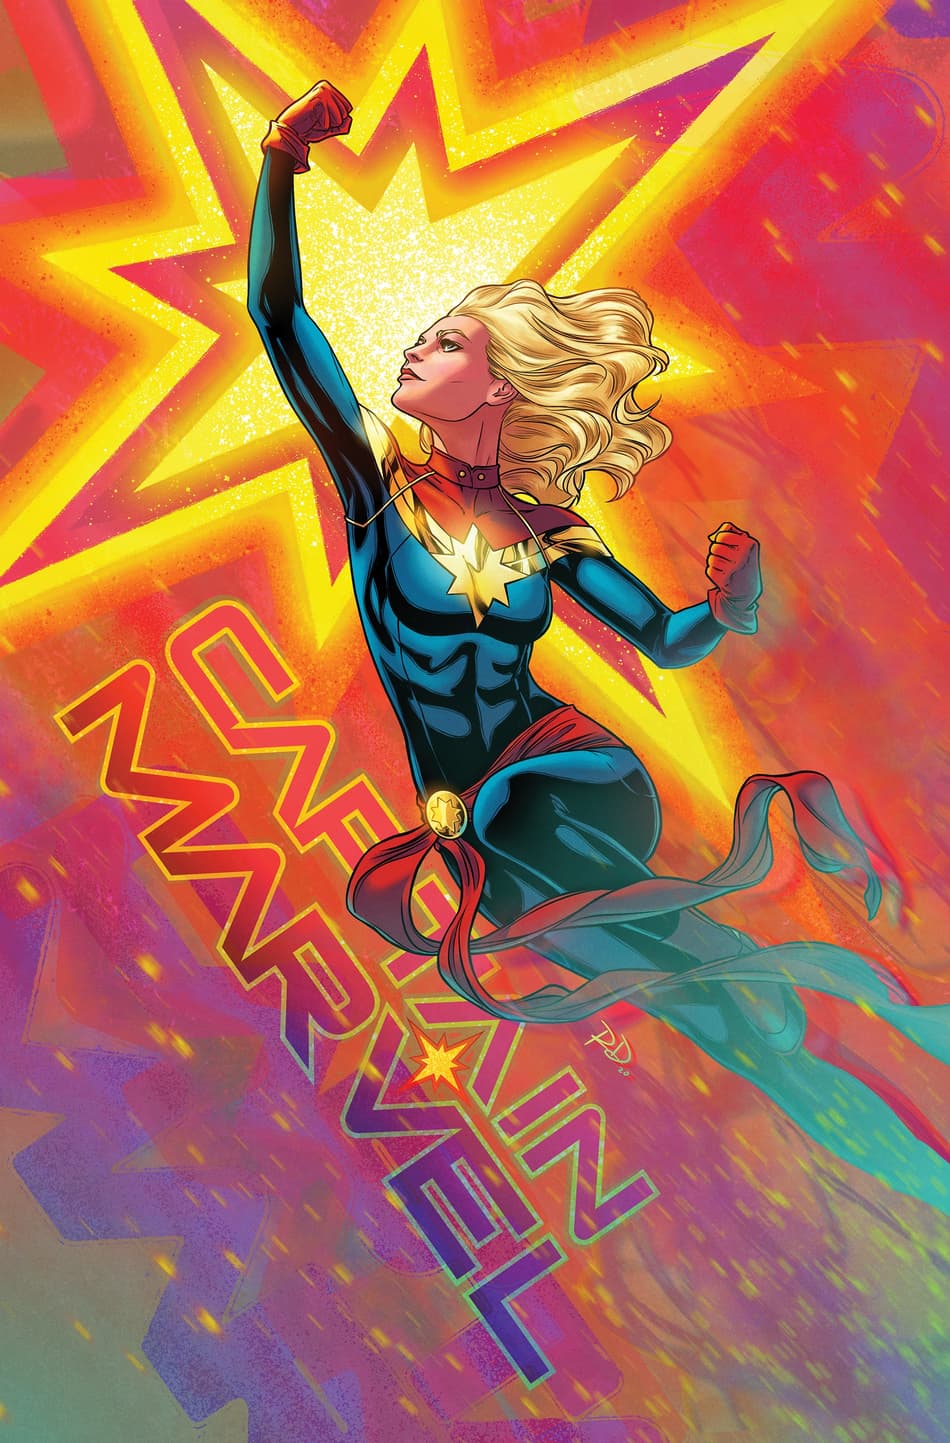 CAPTAIN MARVEL (2019) #23 variant cover by Russell Dauterman